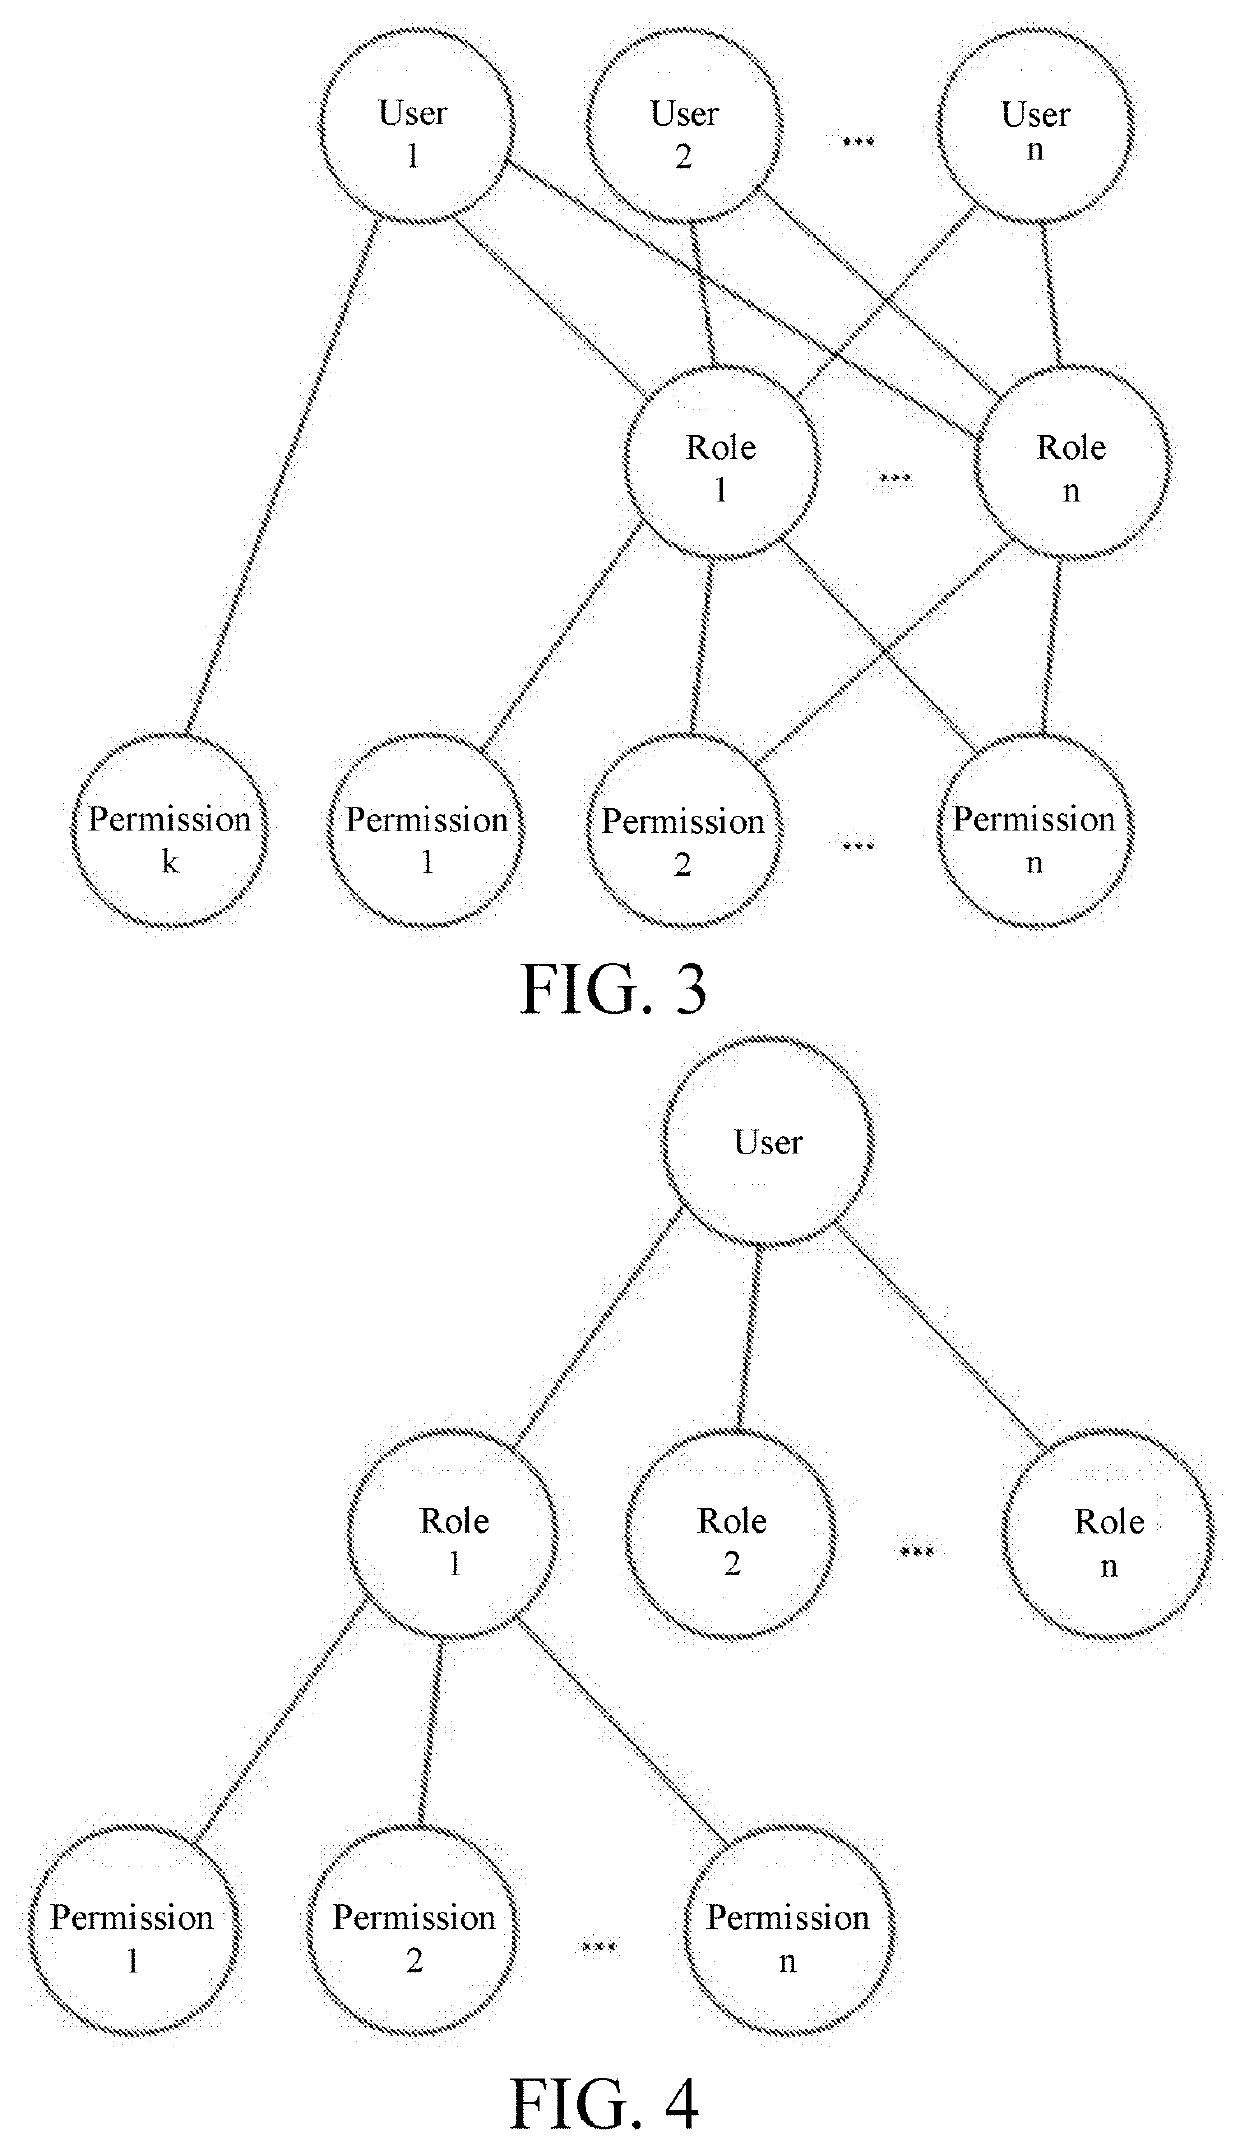 Method for authorizing operation permissions of form-field values